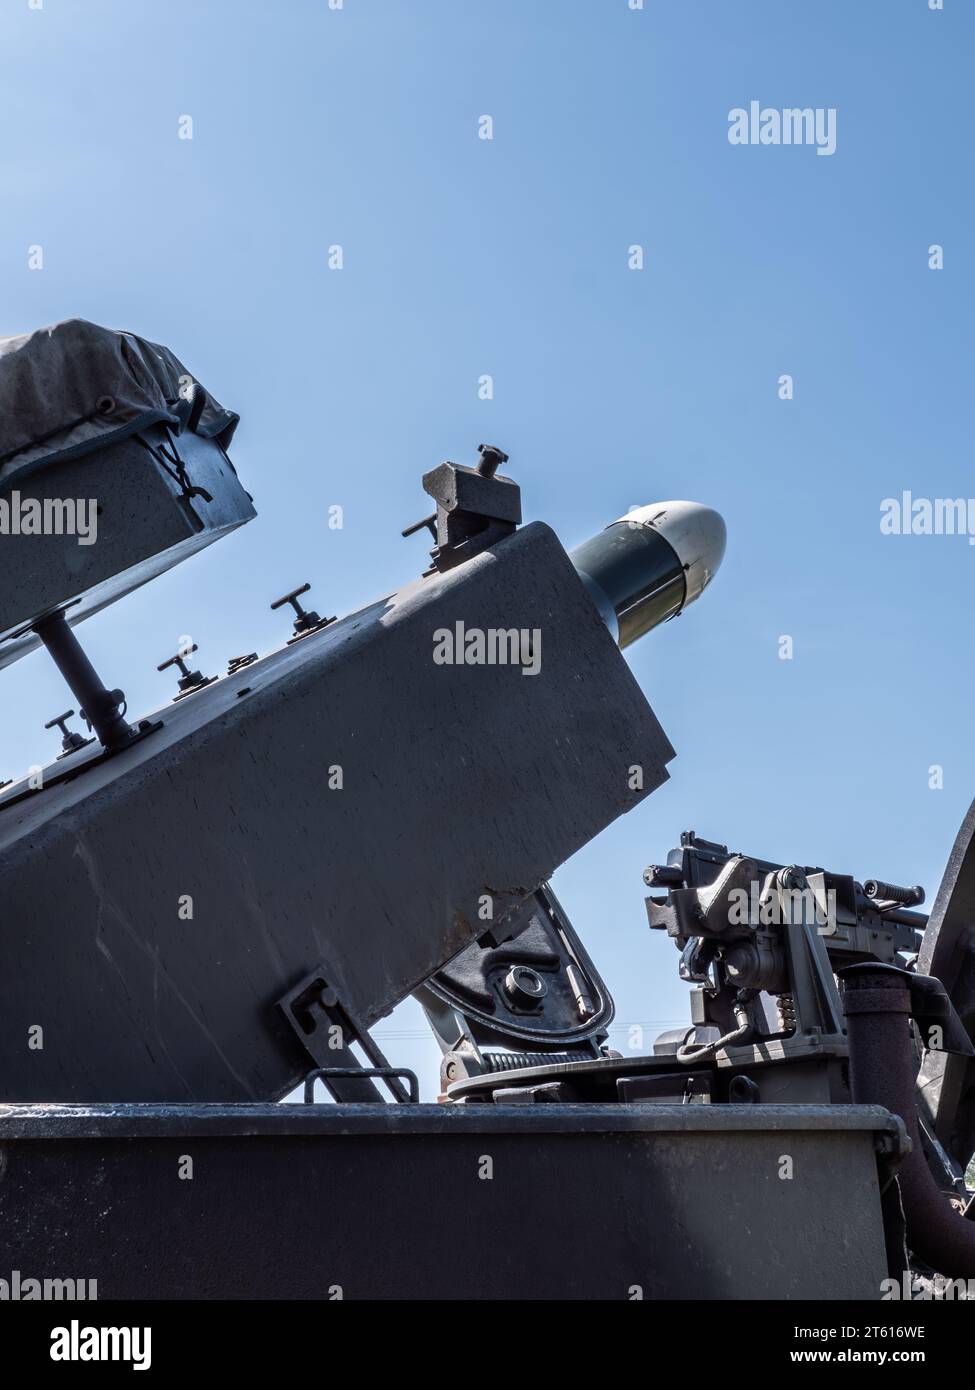 Missile, rocket launcher on a small ,military vehicle,armoured vehicle, against a blue sky Stock Photo